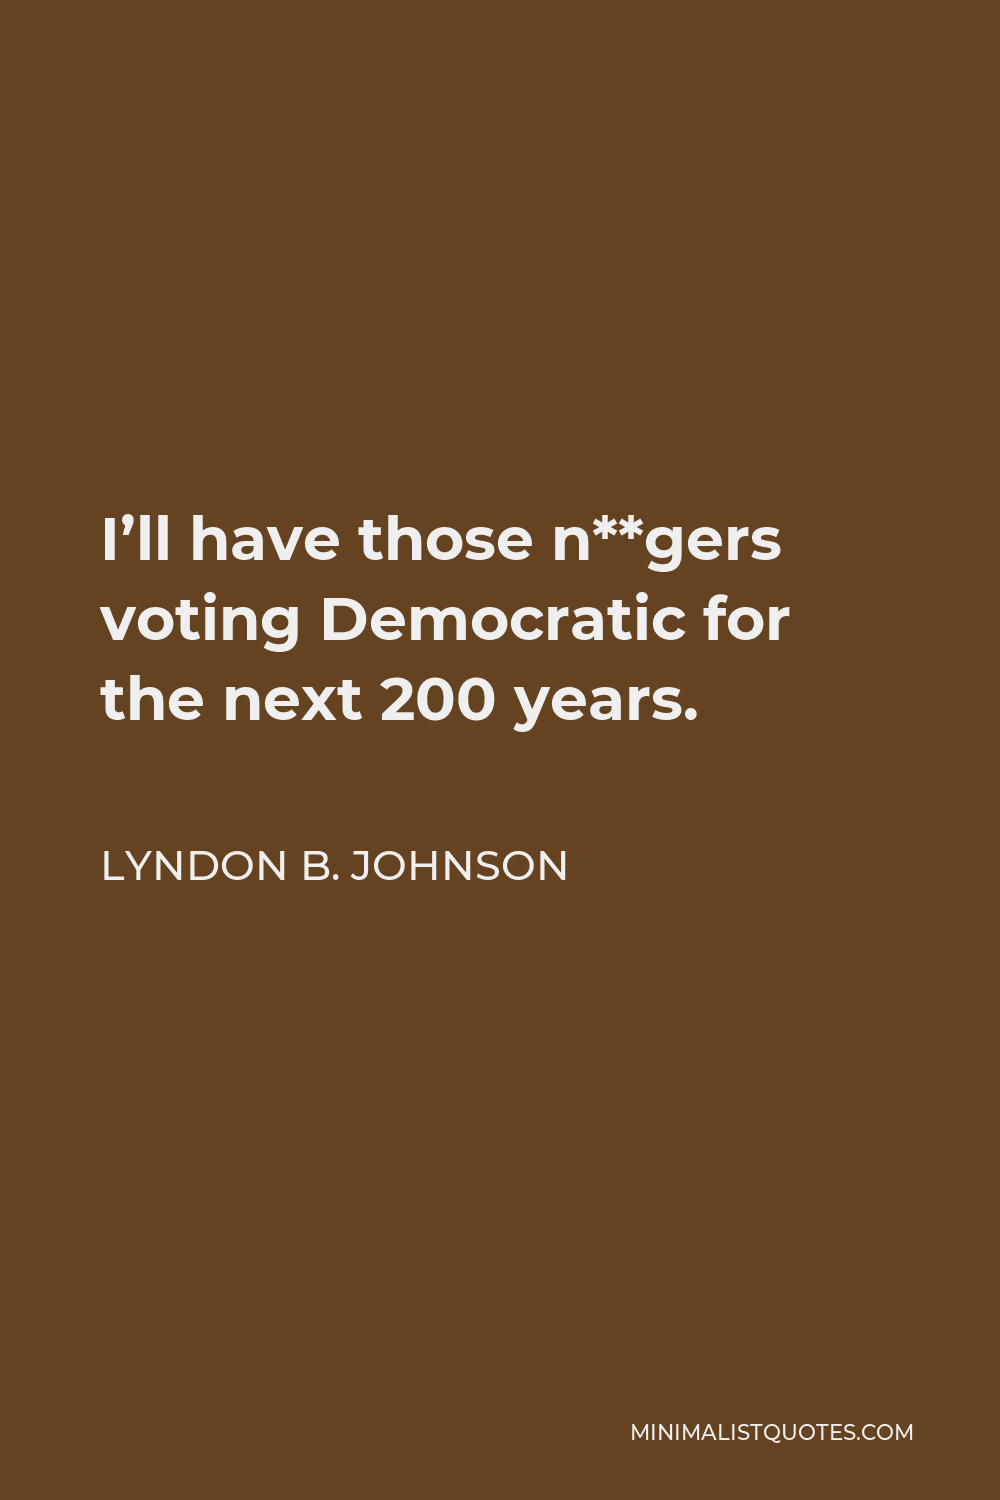 Lyndon B. Johnson Quote - I’ll have those n**gers voting Democratic for the next 200 years.